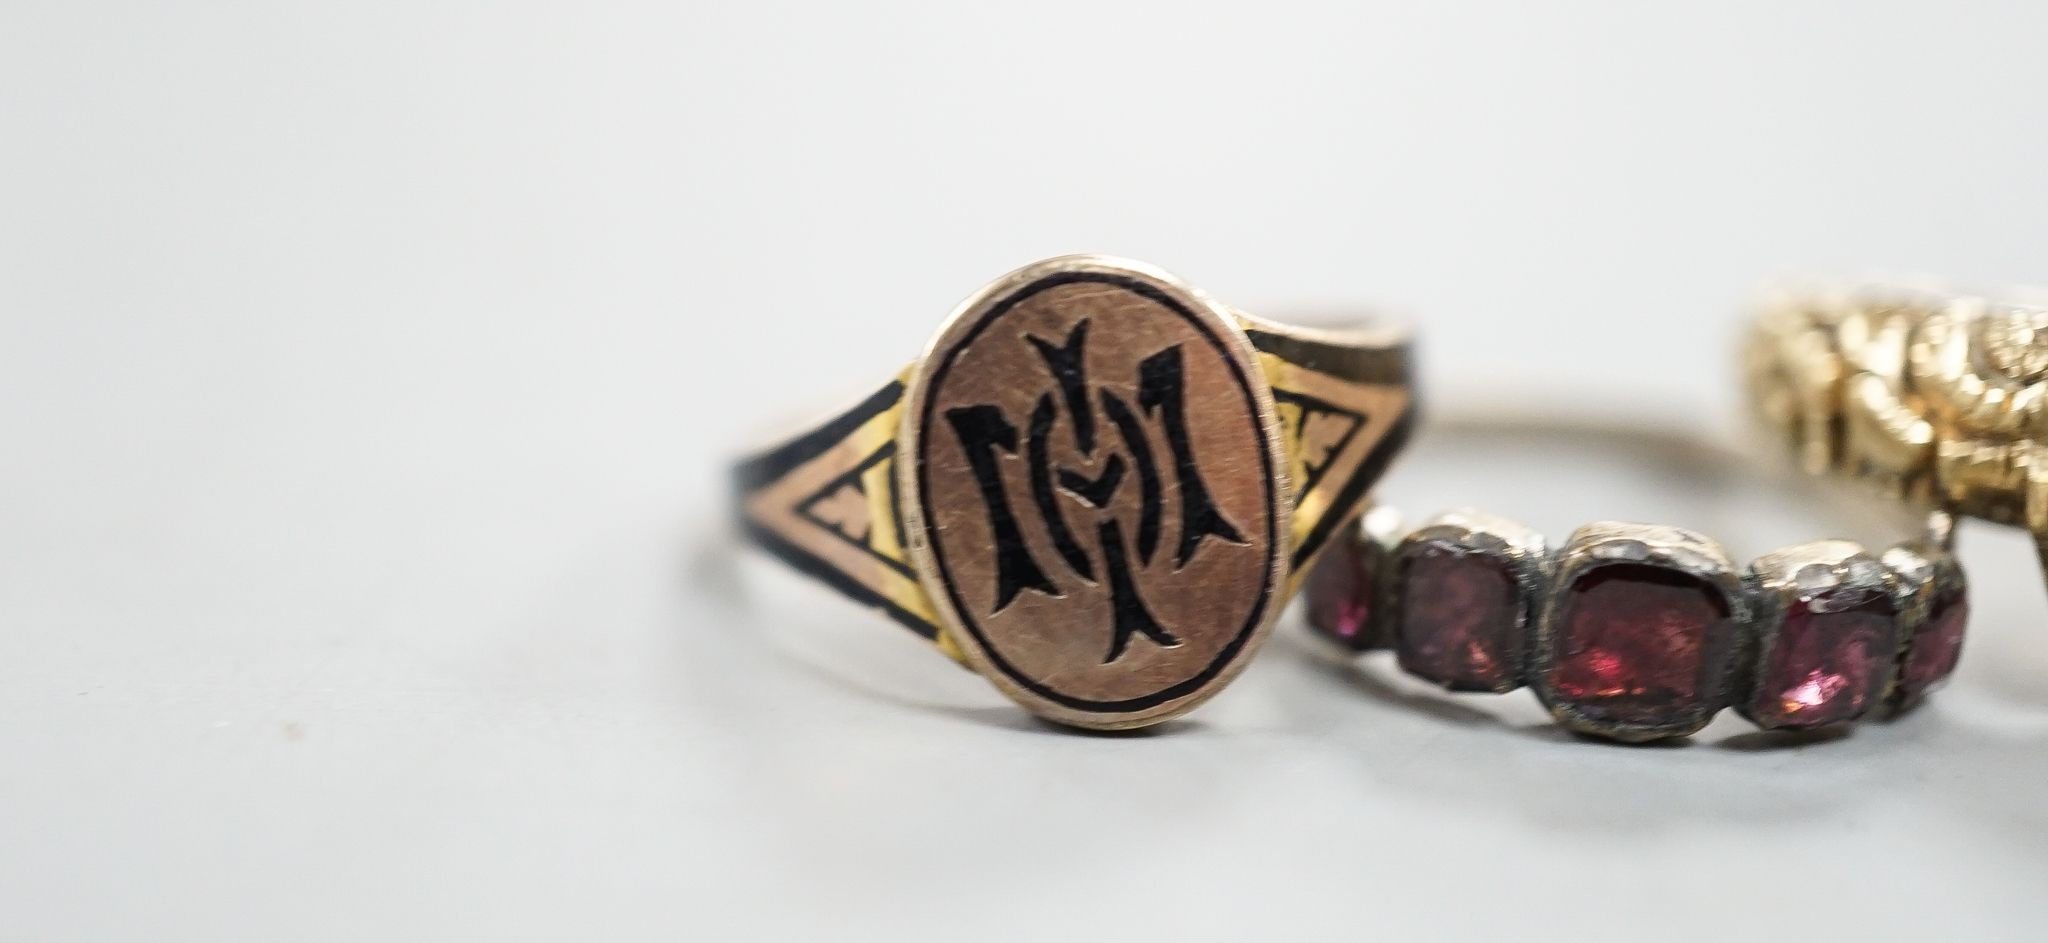 A late George III yellow metal, garnet and plaited hair mounted mourning ring, inscribed 'Ann Haycock Obt. 1 Mar. 1817 at 25, Mary Haycock ob, 26 Mar, 1817 at 15' size N/O, gross 4.6 grams and two other antique rings.